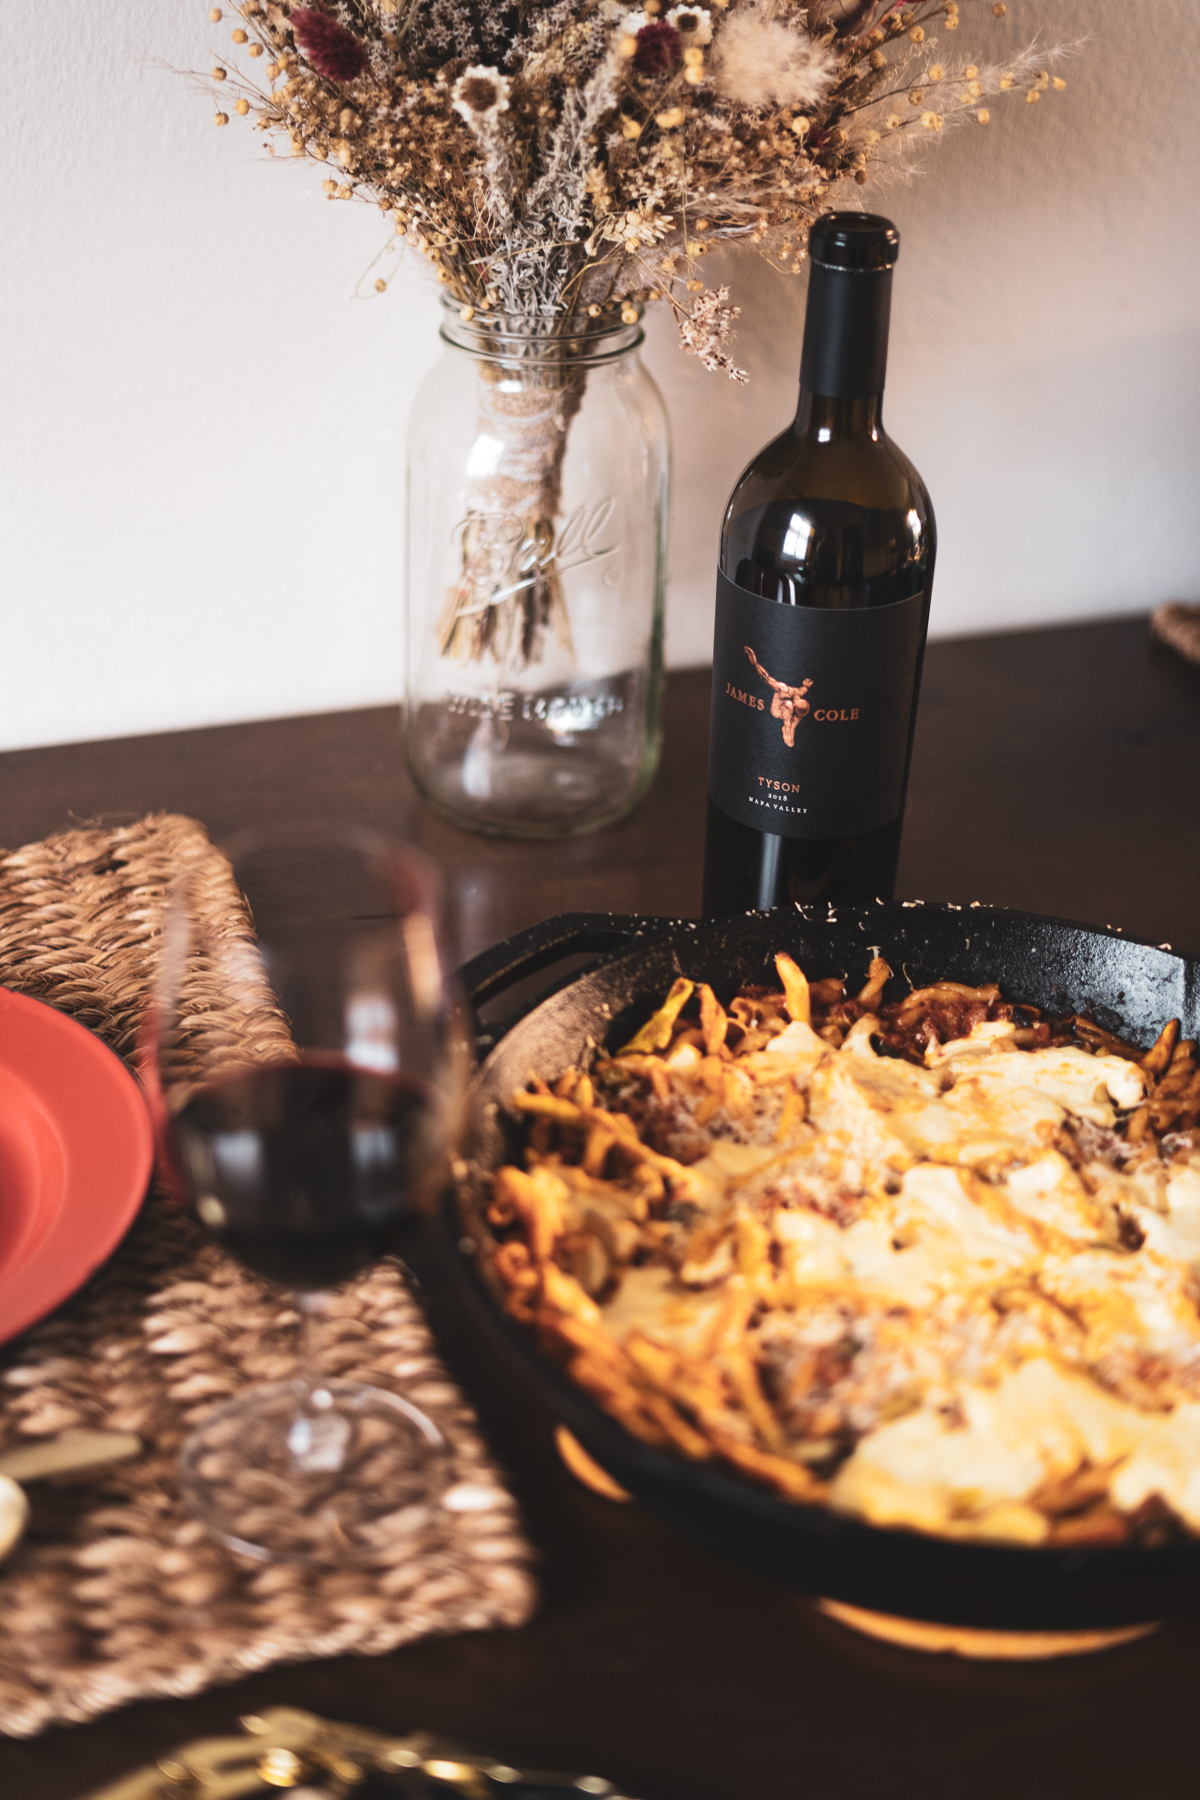 Baked Ziti paired with 2018 Tyson Red Wine. The dinner is set at a dark brown wooden table with jute placemats and a dried floral bouquet can be seen in the background.